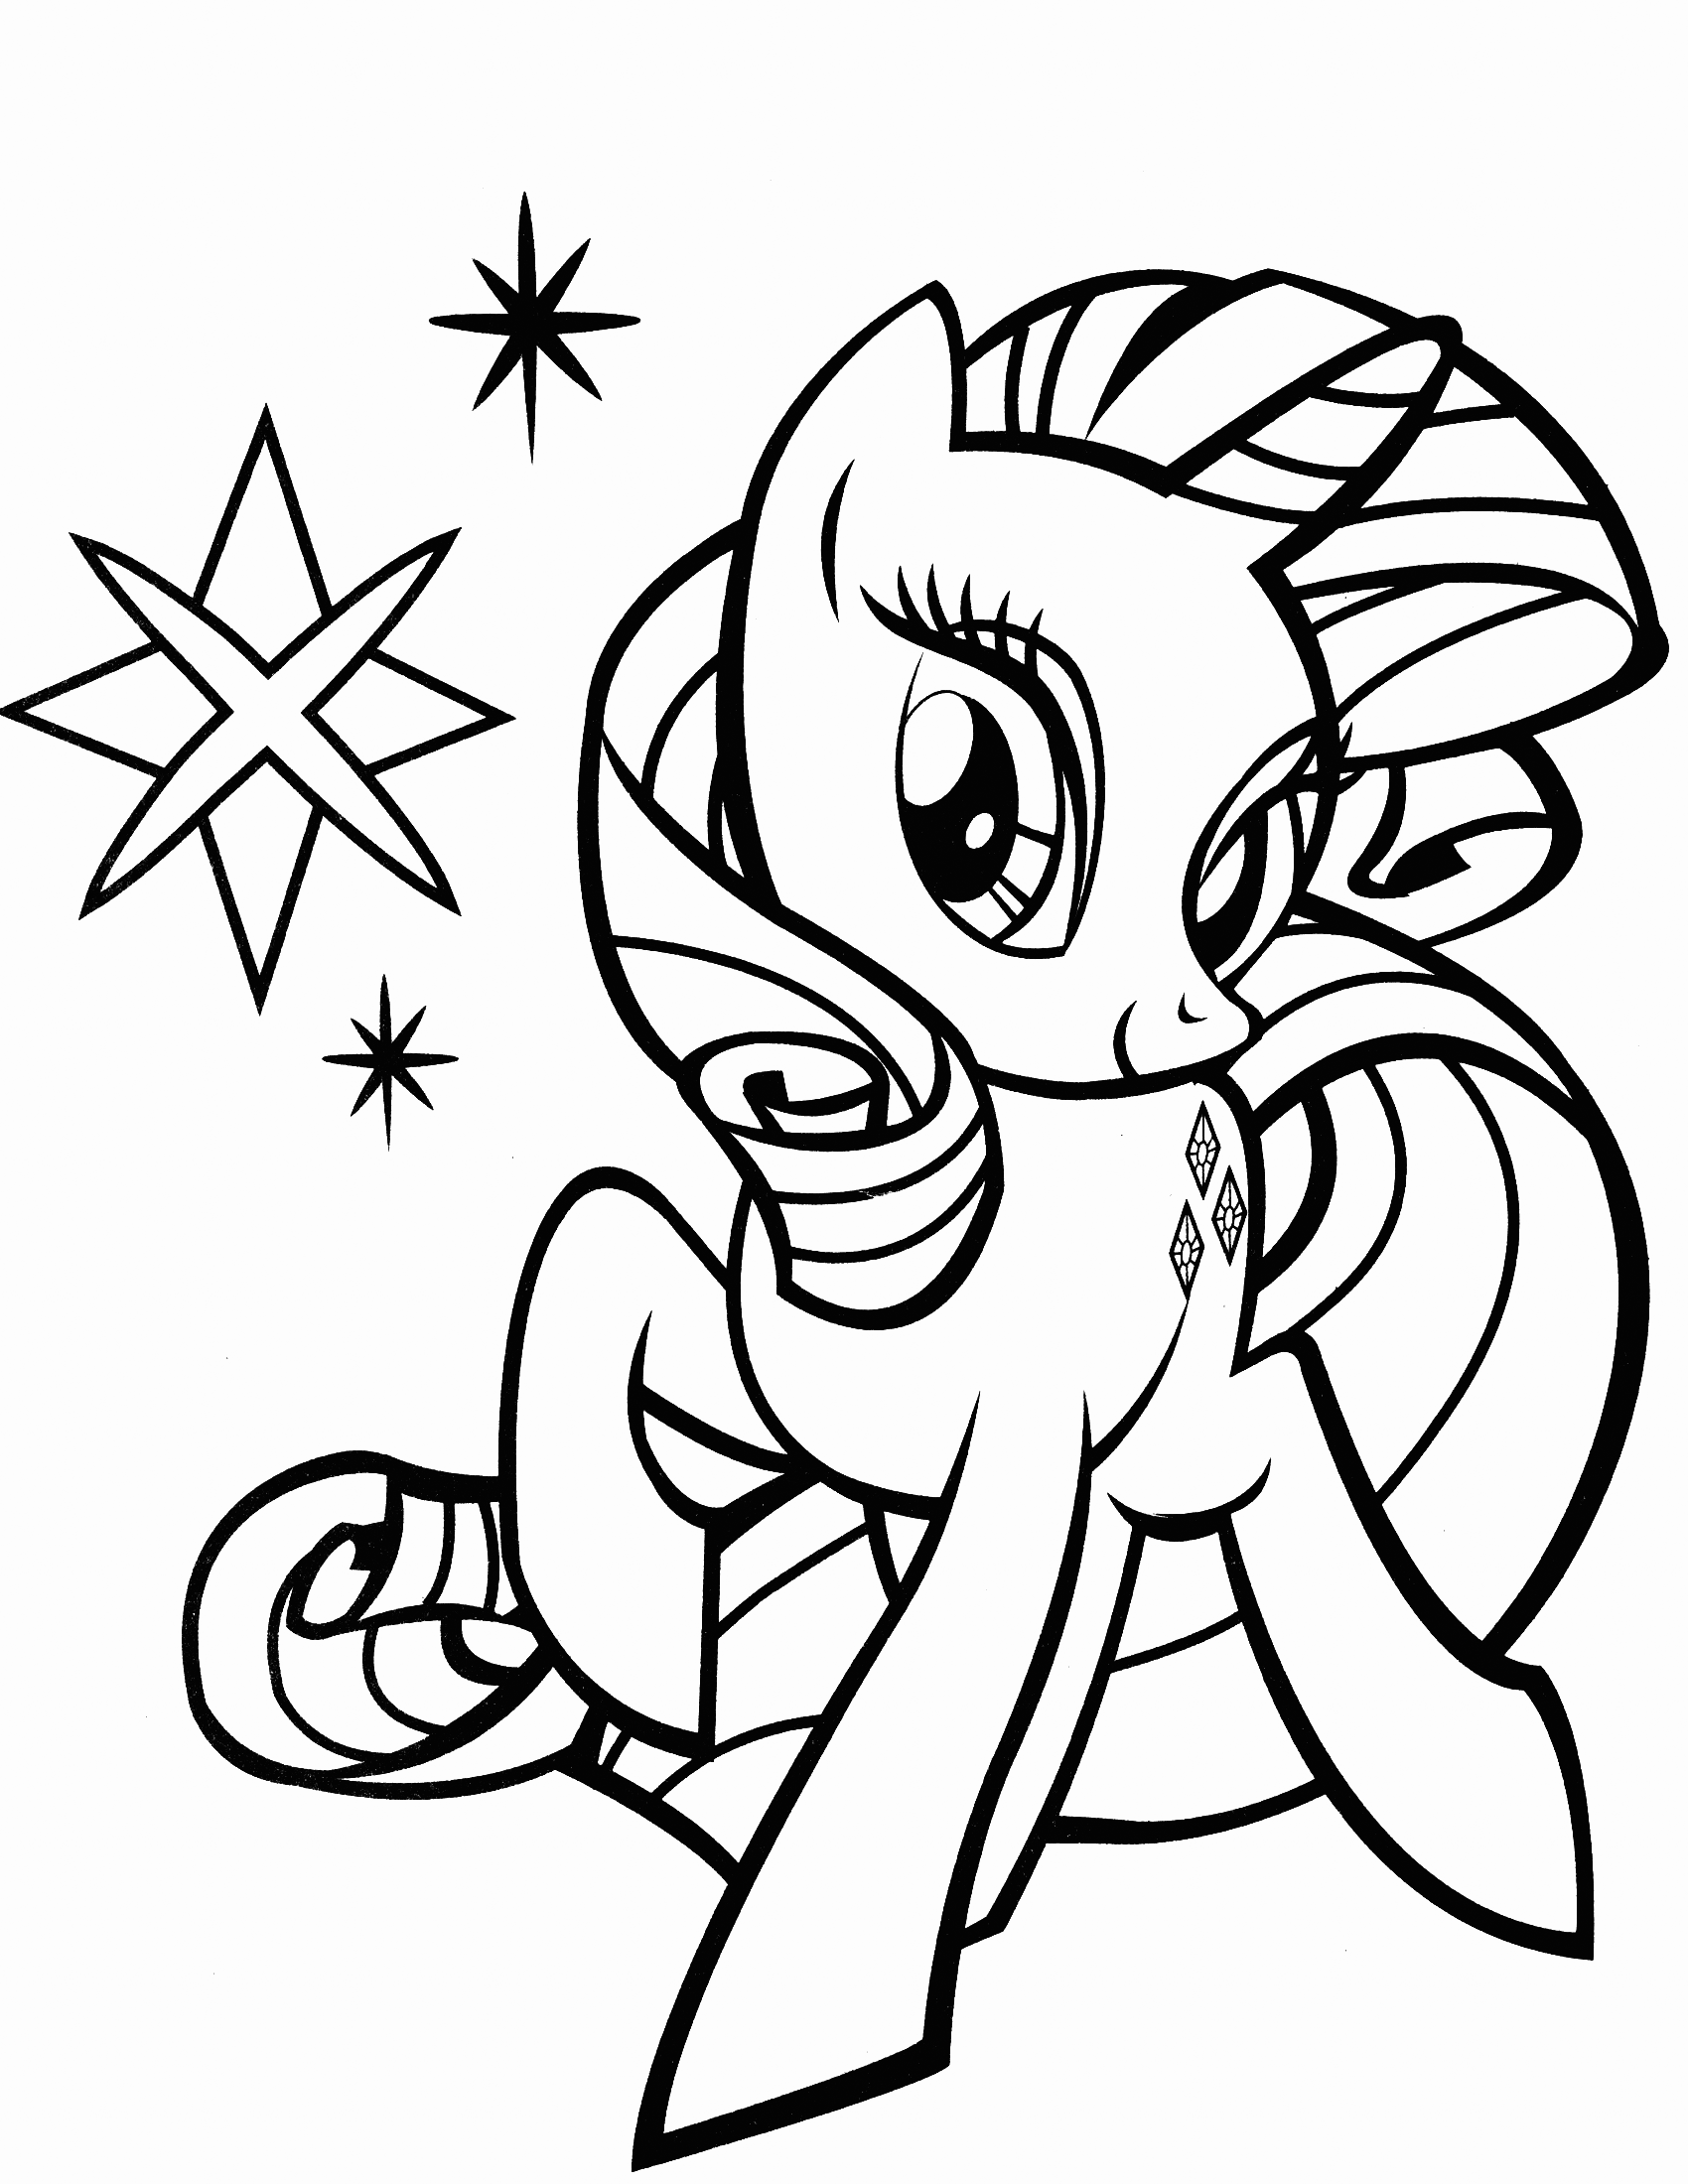 Rarity Coloring Pages   Best Coloring Pages For Kids